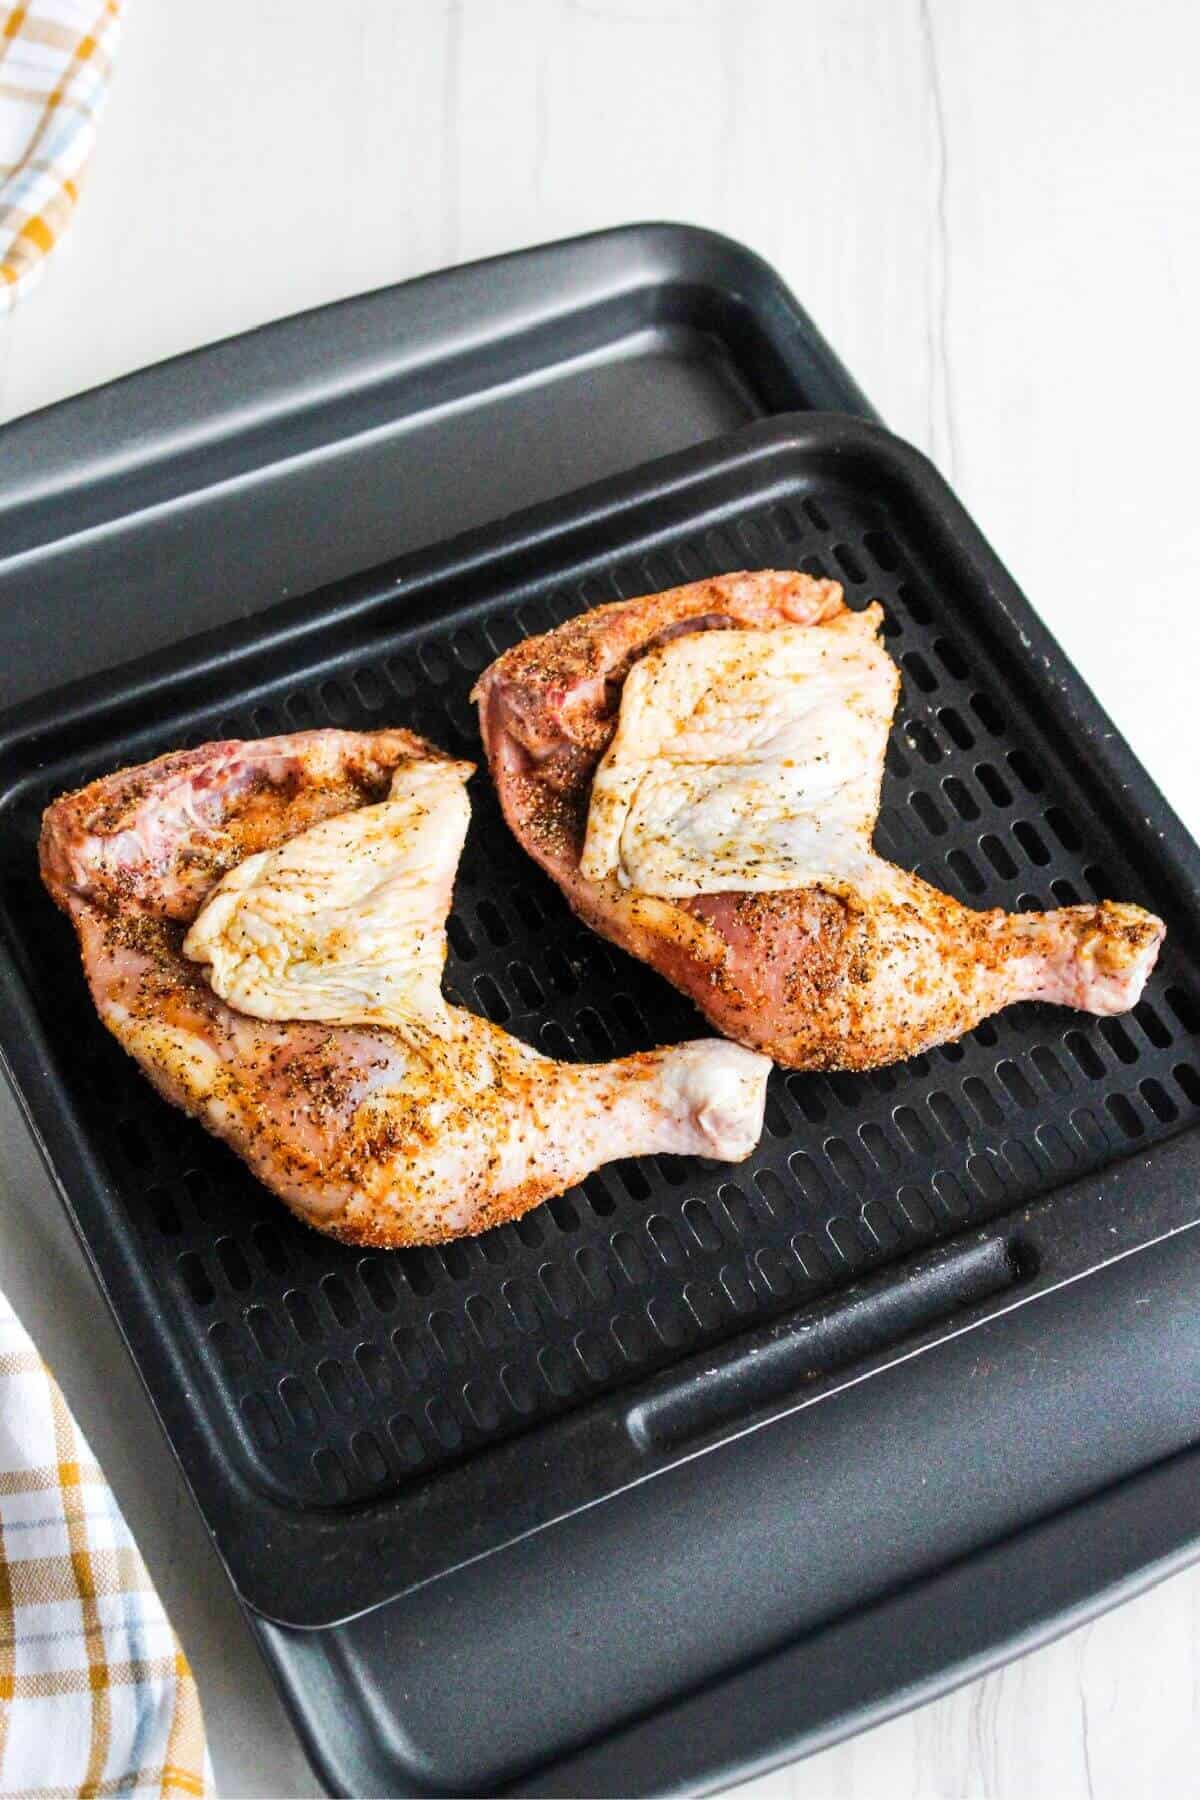 Partially cooked chicken legs on air fryer tray.